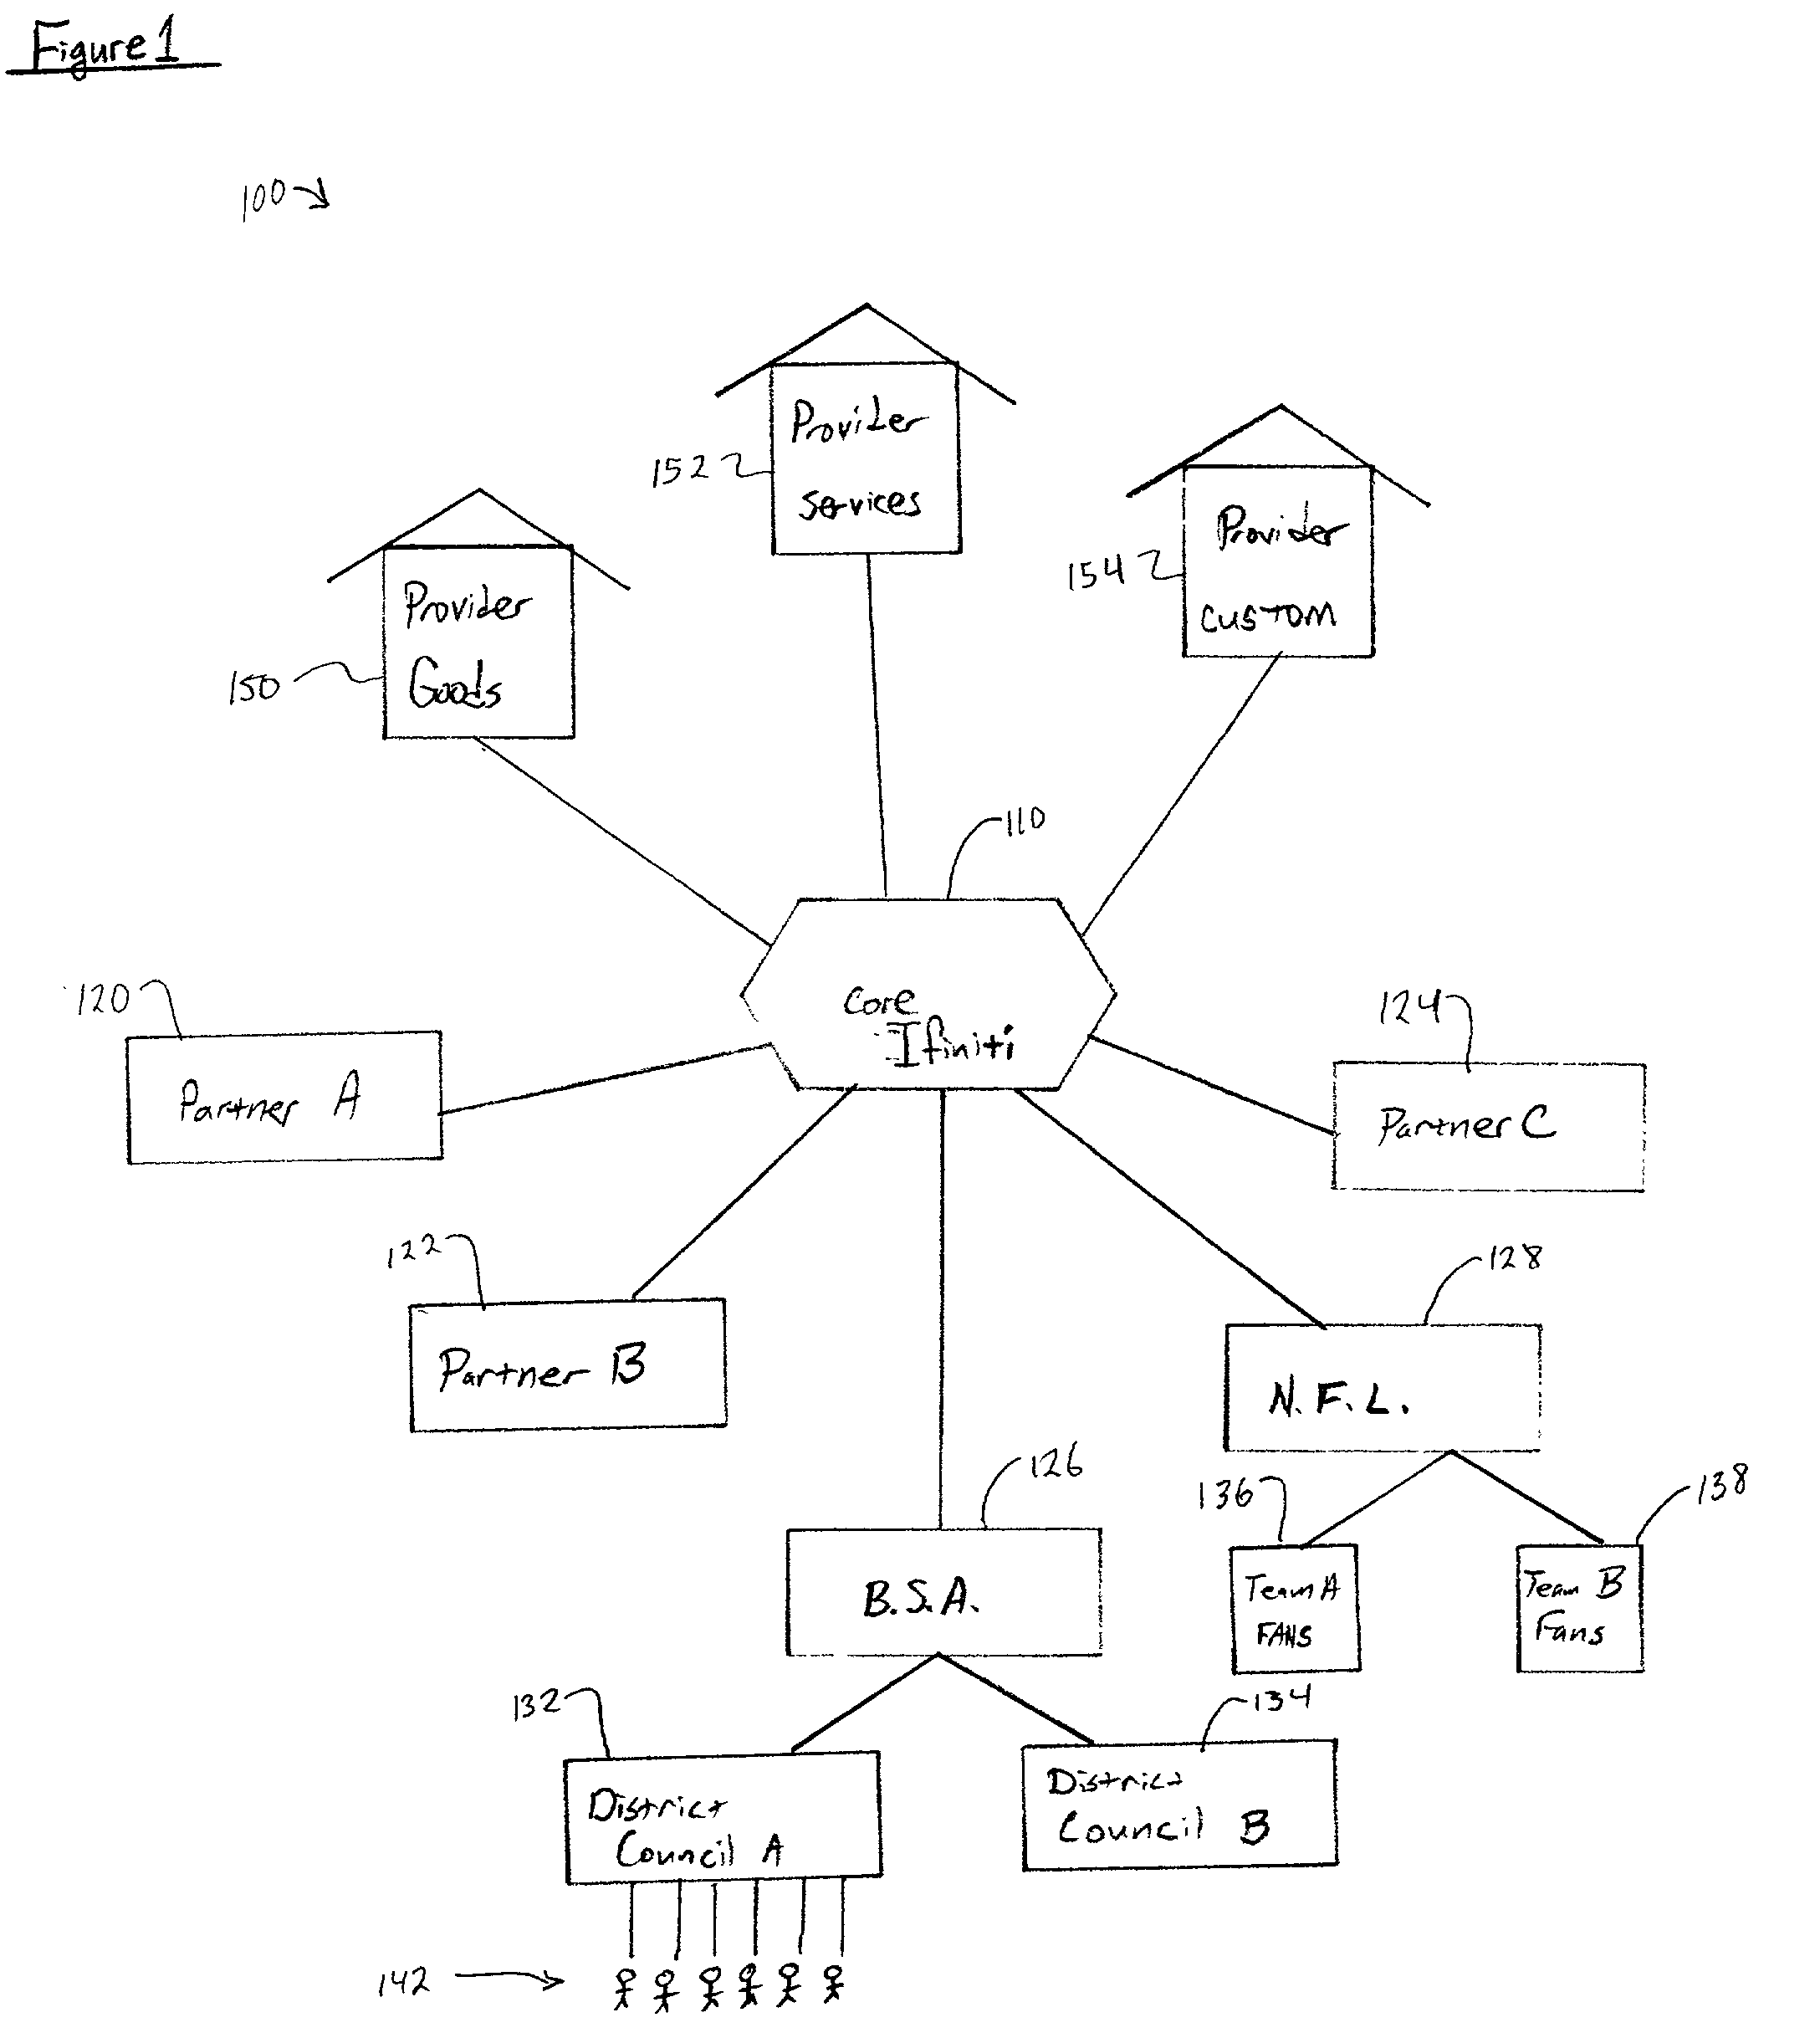 System, method, and architecture for implementing a business Ifiniti on an information network